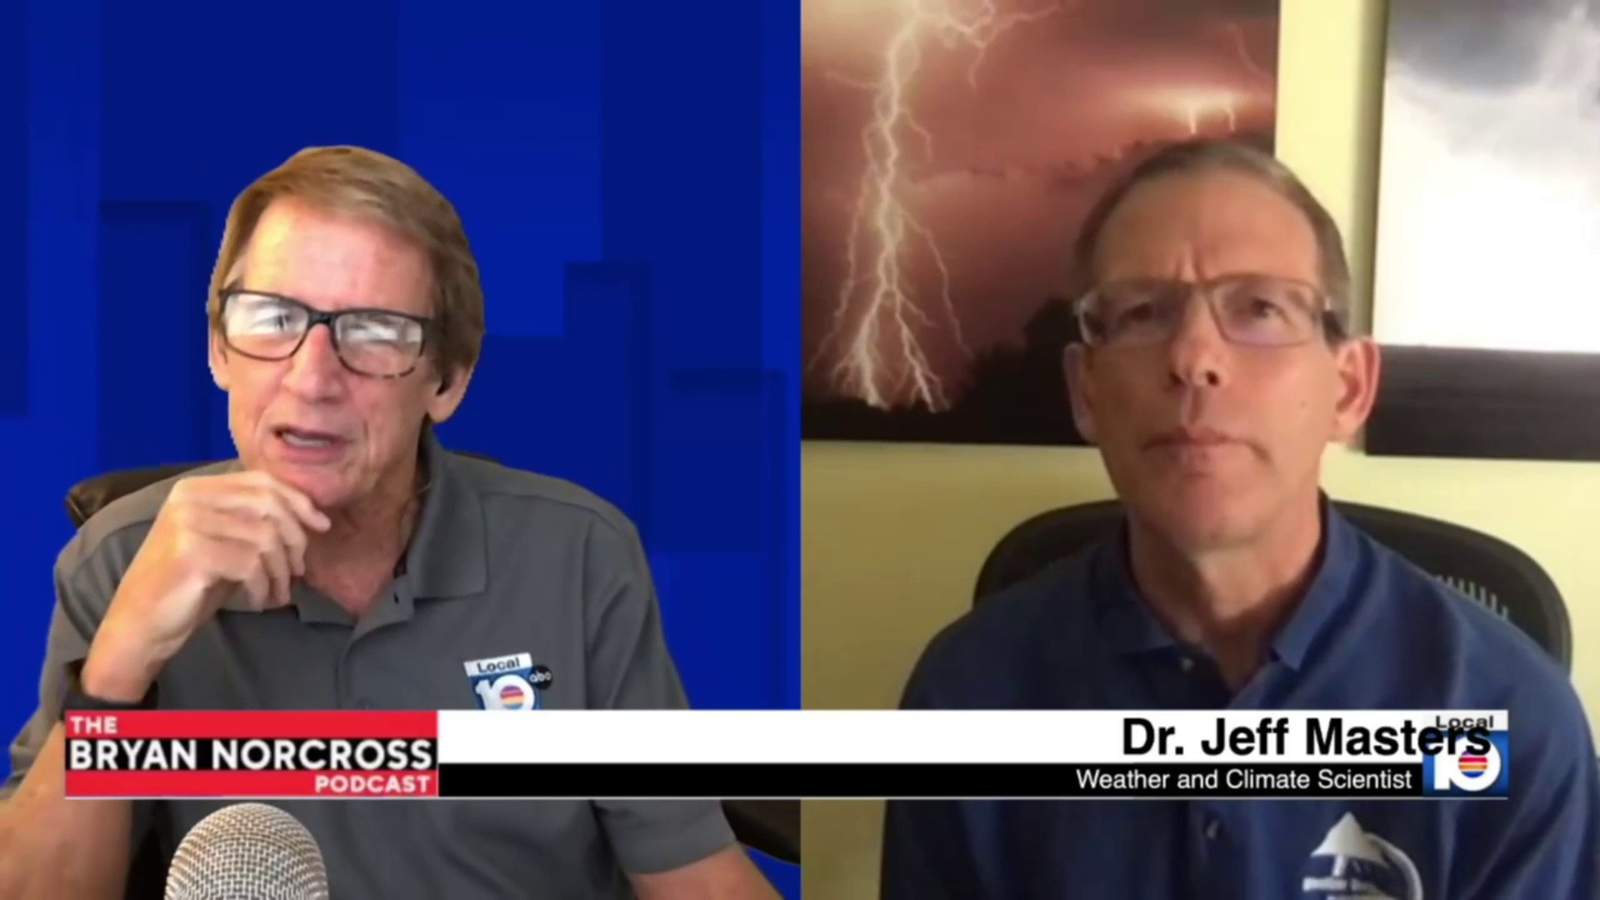 Bryan Norcross Podcast: Impacts of climate change on our weather with Dr. Jeff Masters